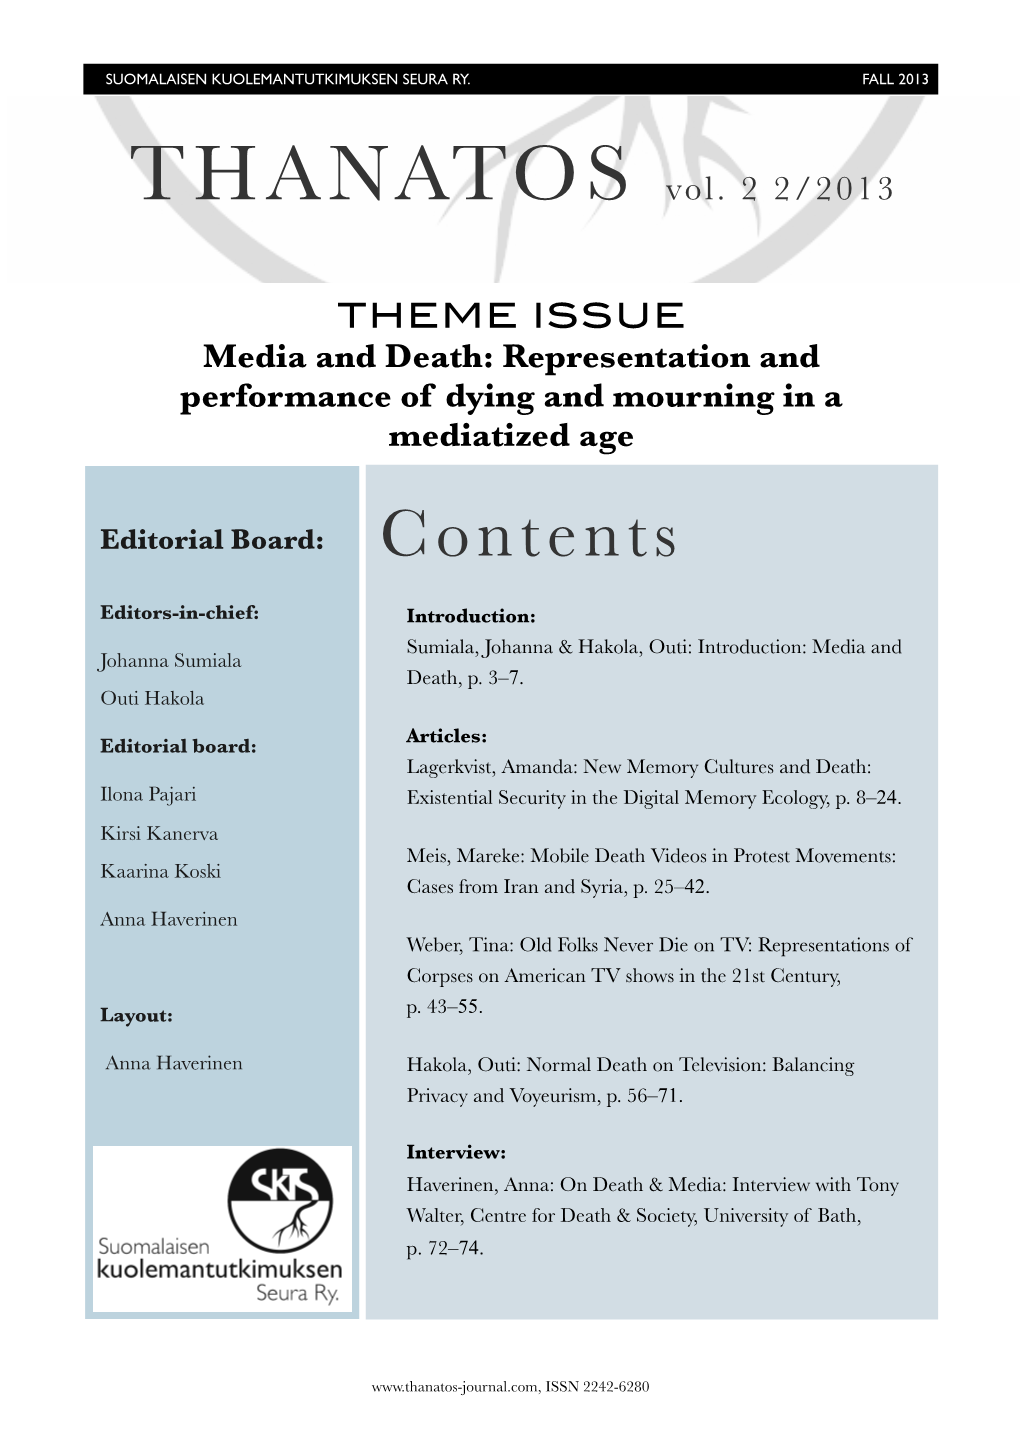 Media and Death: Representation and Performance of Dying and Mourning in a Mediatized Age